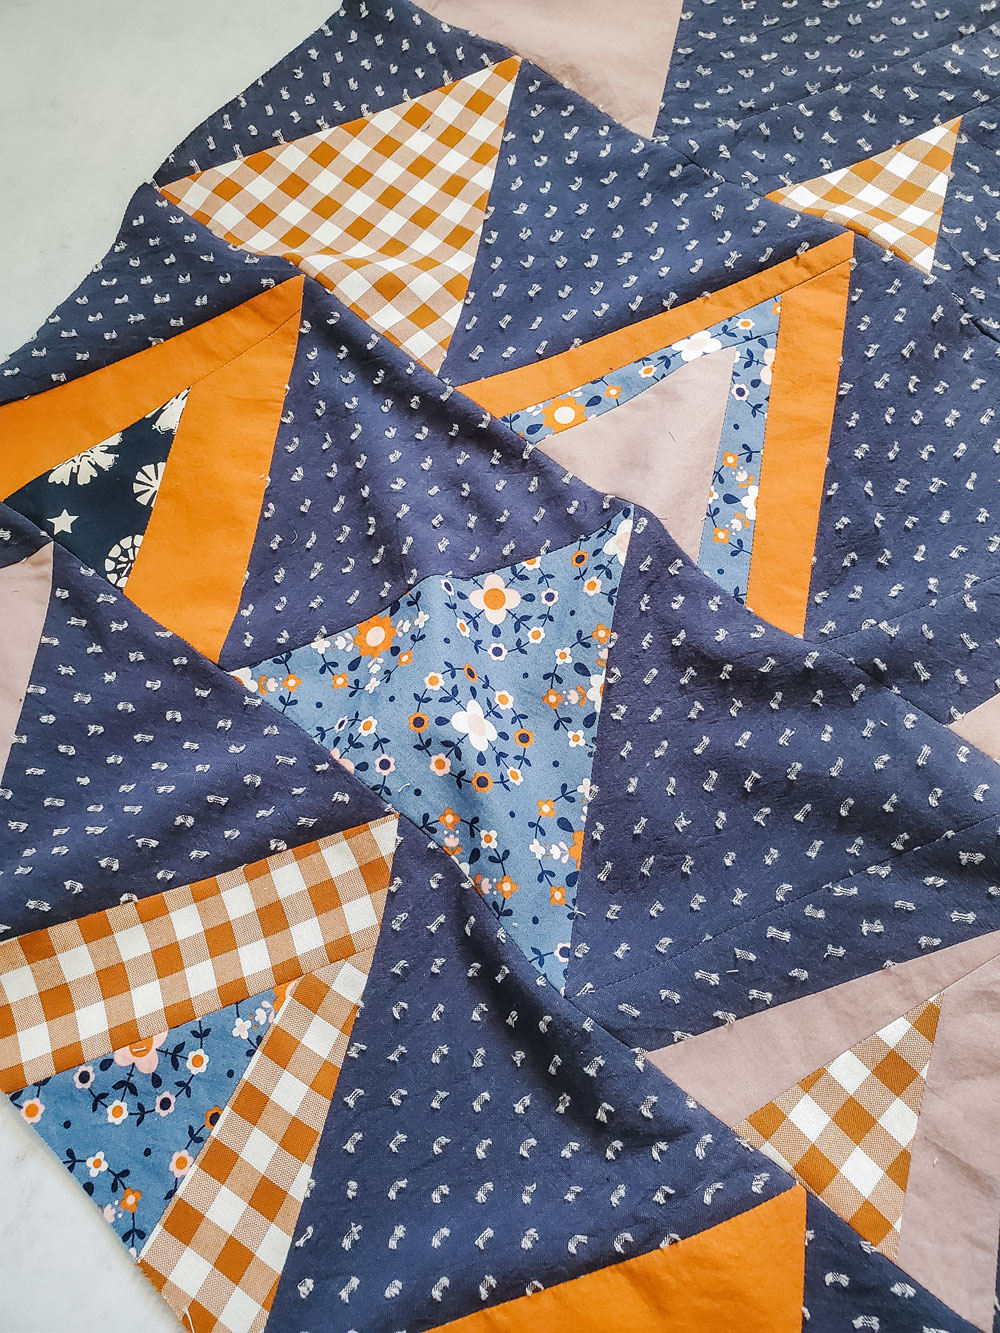 How to use scrap fabric in quilt patterns! Use these tricks to make Suzy Quilts patterns with recycled fabric you already have. #scrappyquilt #sewing #quilt suzyquilts.com